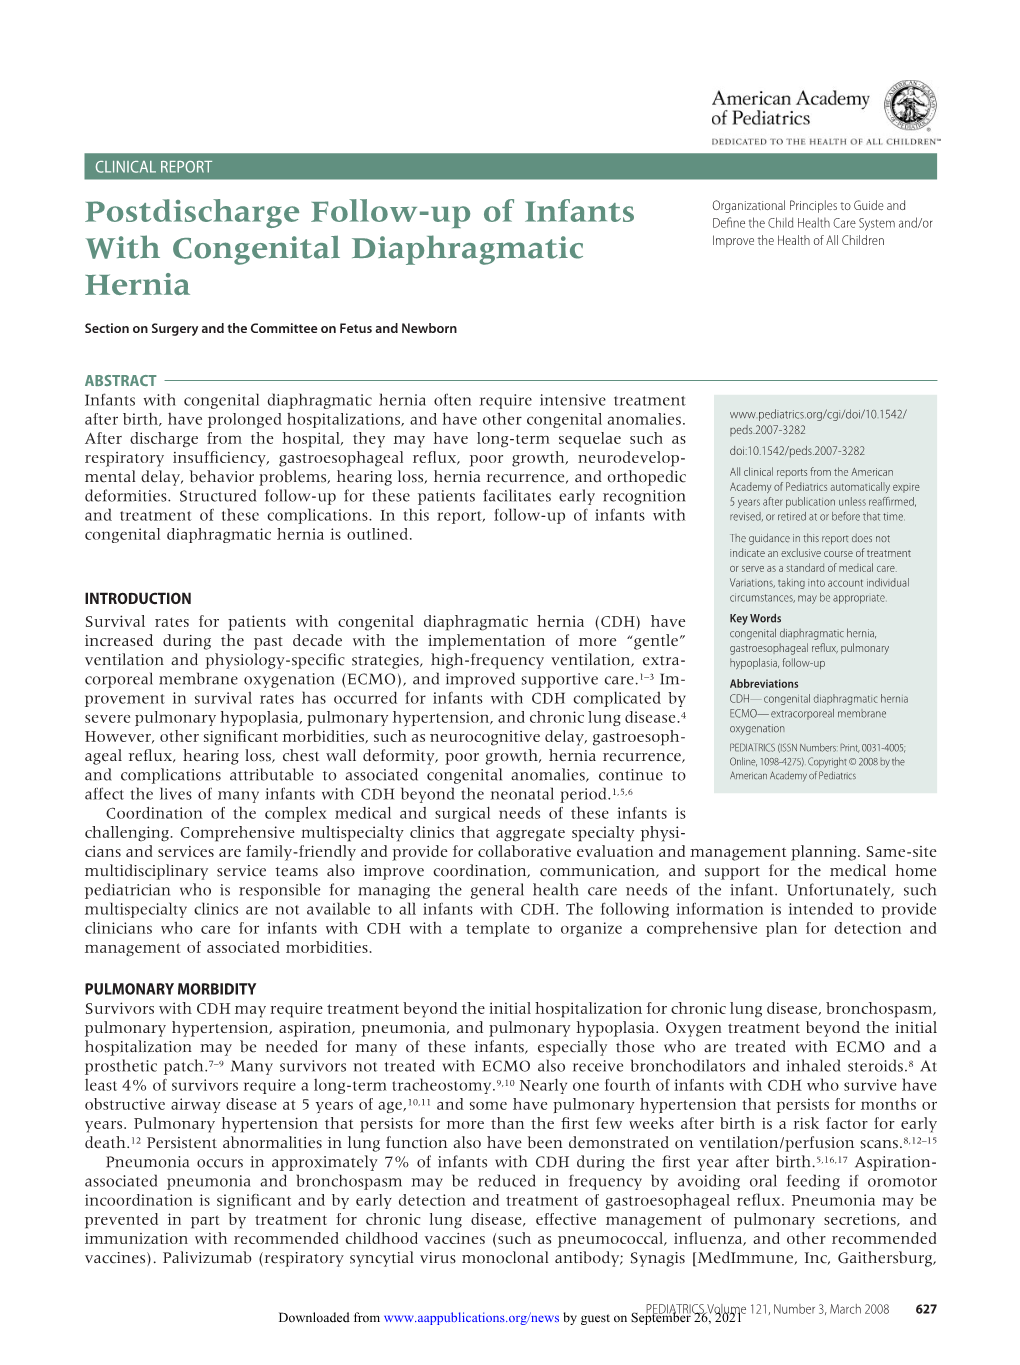 Postdischarge Follow-Up of Infants with Congenital Diaphragmatic